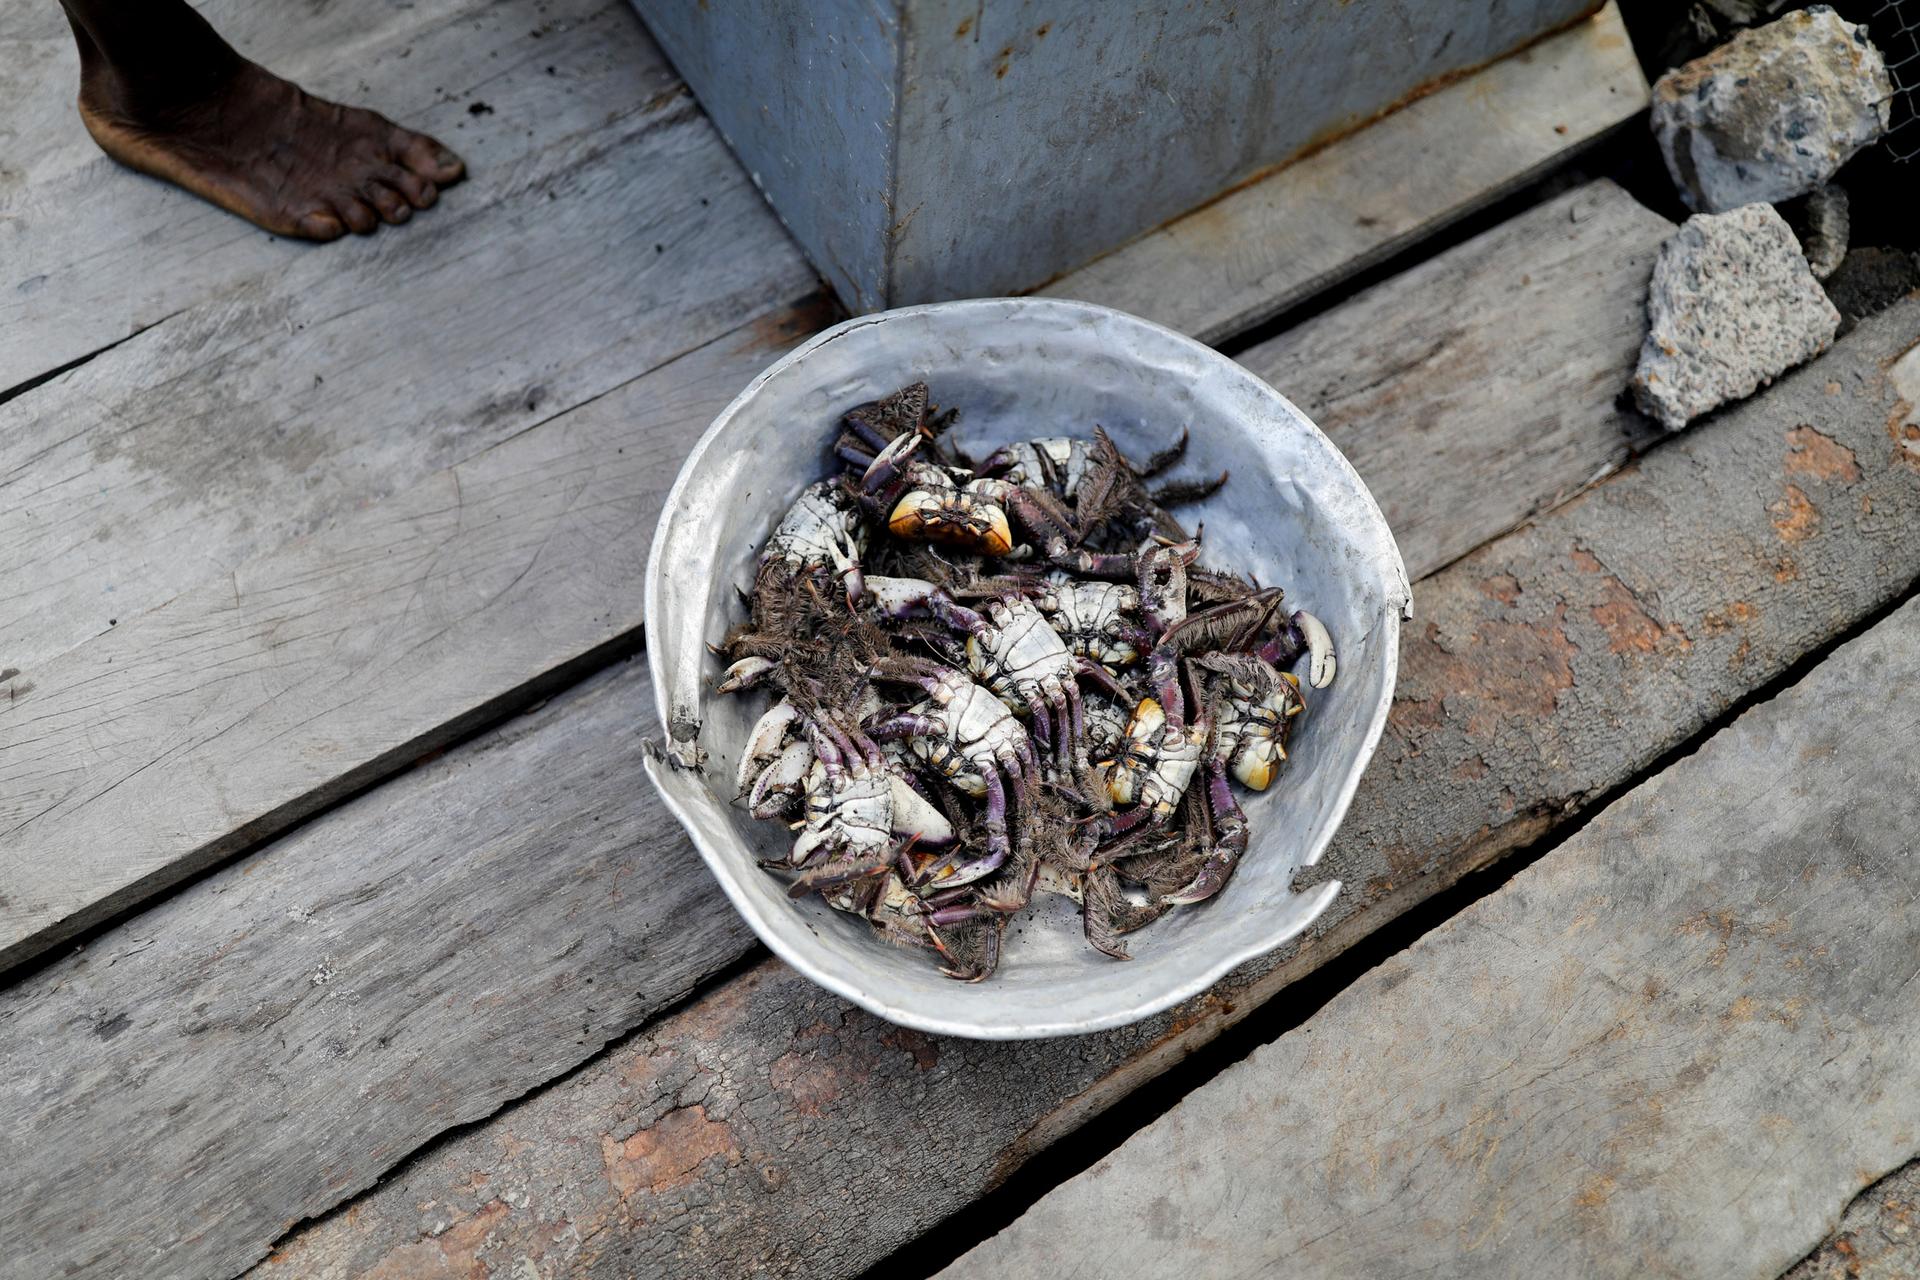 A bowl of crabs is shown sitting on a wooden porch.